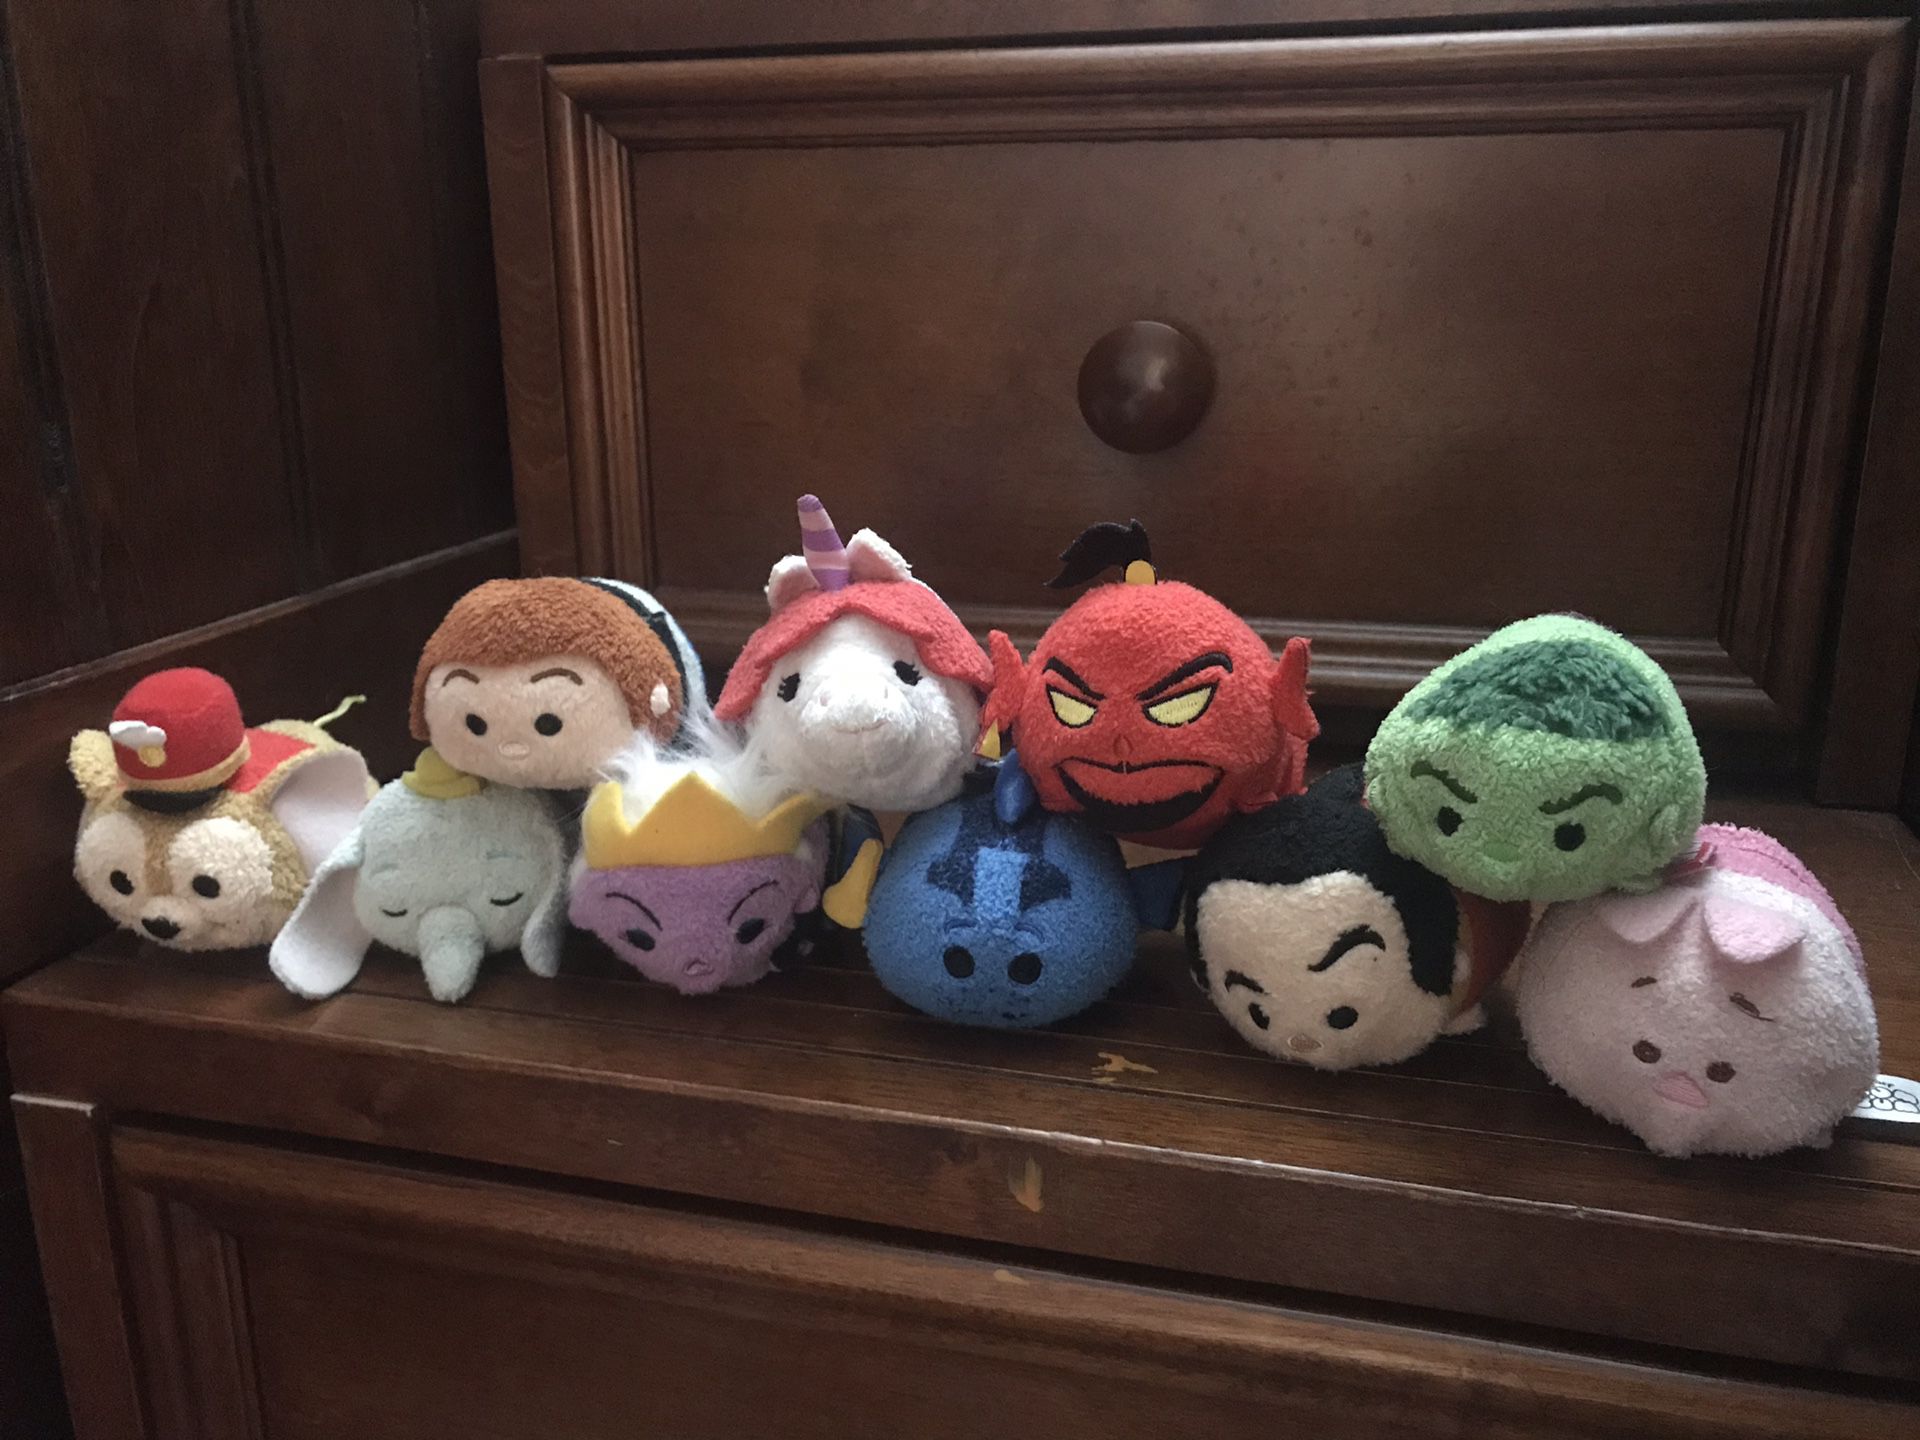 Tsum Tsum all for $20 or $2.50 each